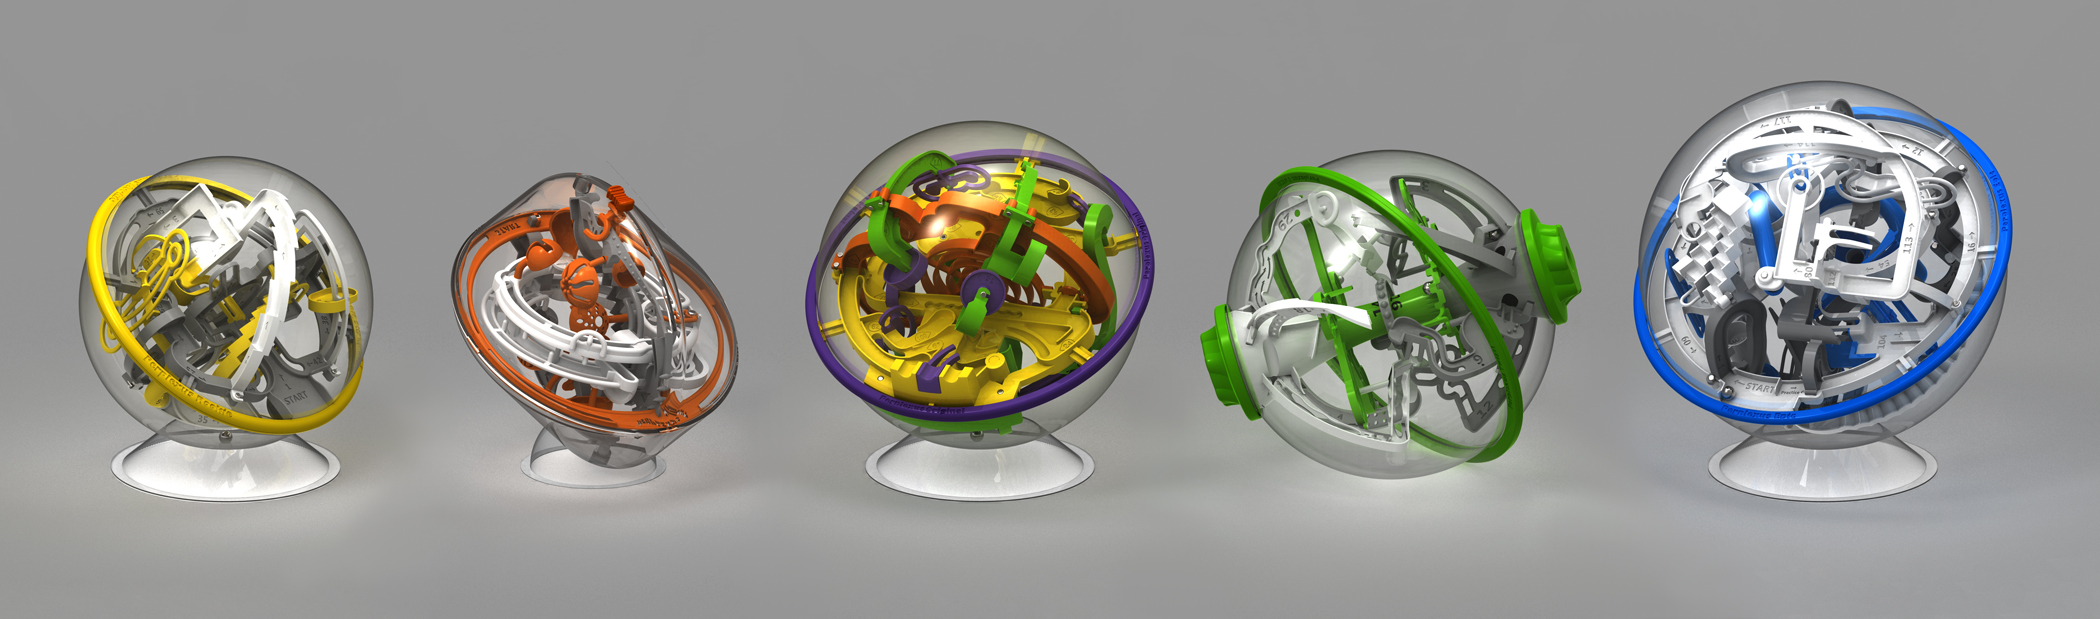 Spin Master PERPLEXUS Rookie 3D Maze Labyrinth Game From Japan